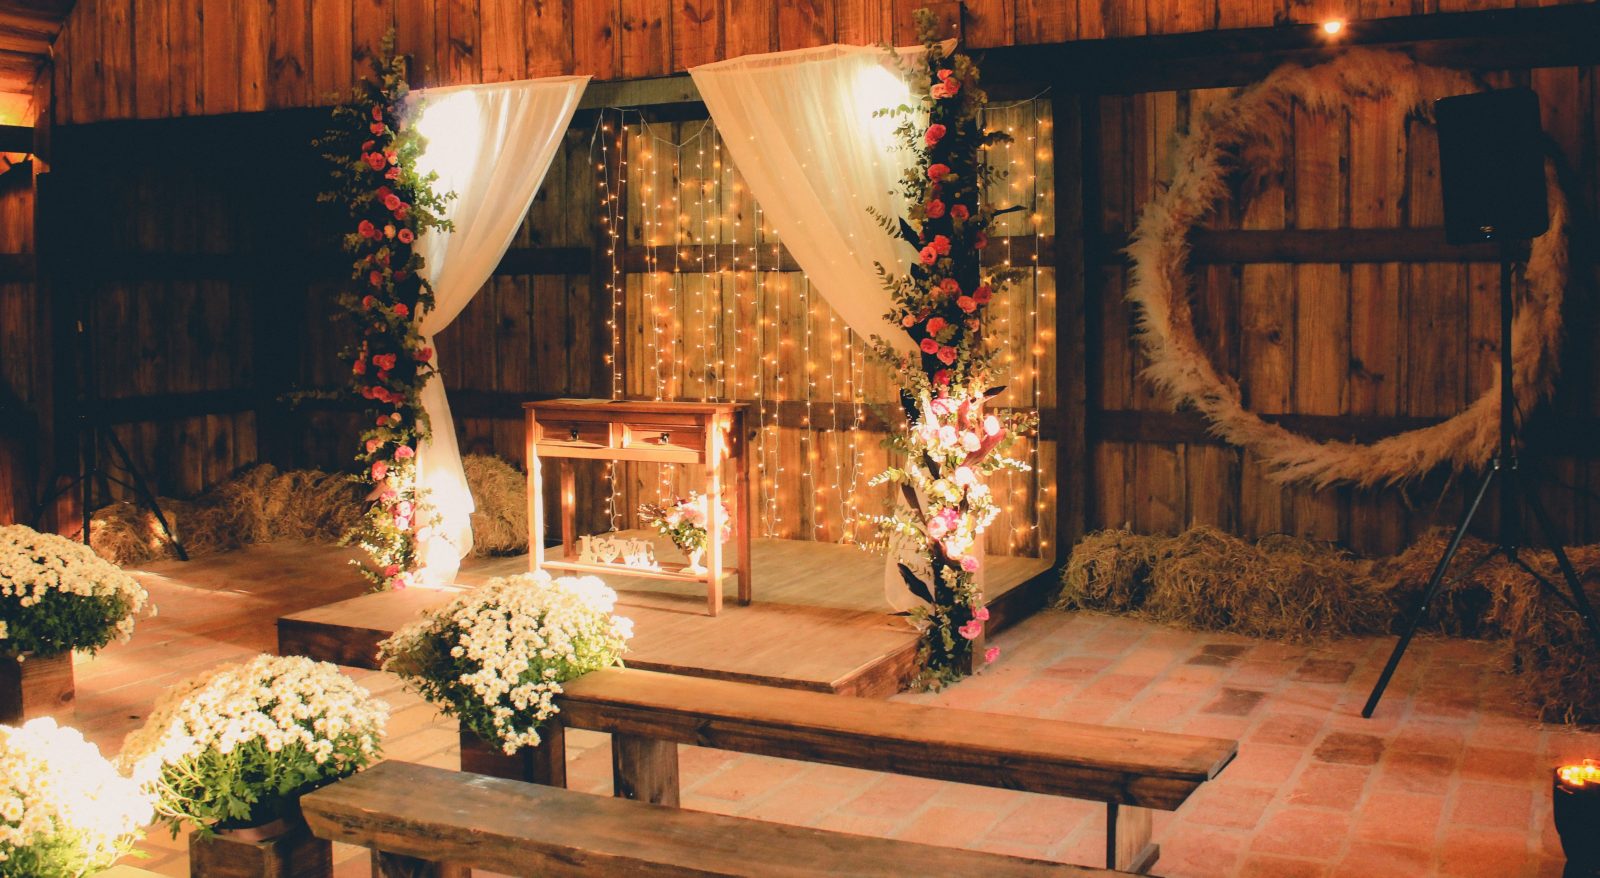 Wedding Backdrop Ideas for the Ceremony